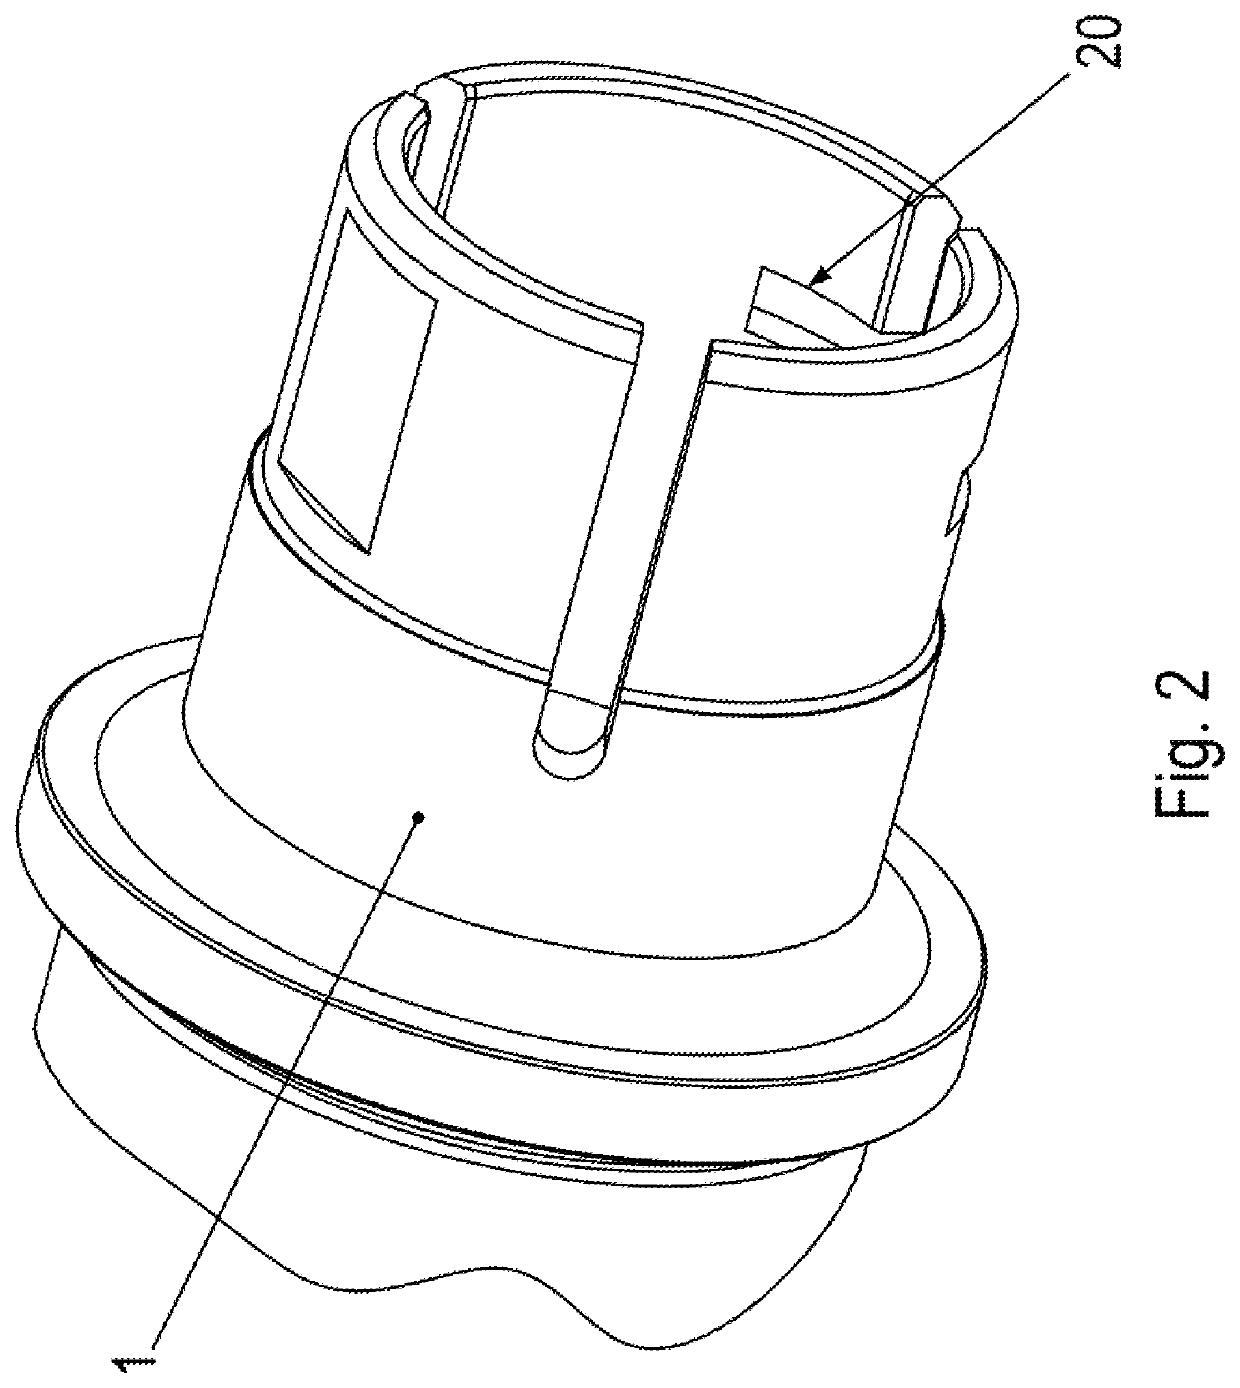 Assembly for connecting an adapter shaft to a shaft in a force-fitting manner using a clamping ring